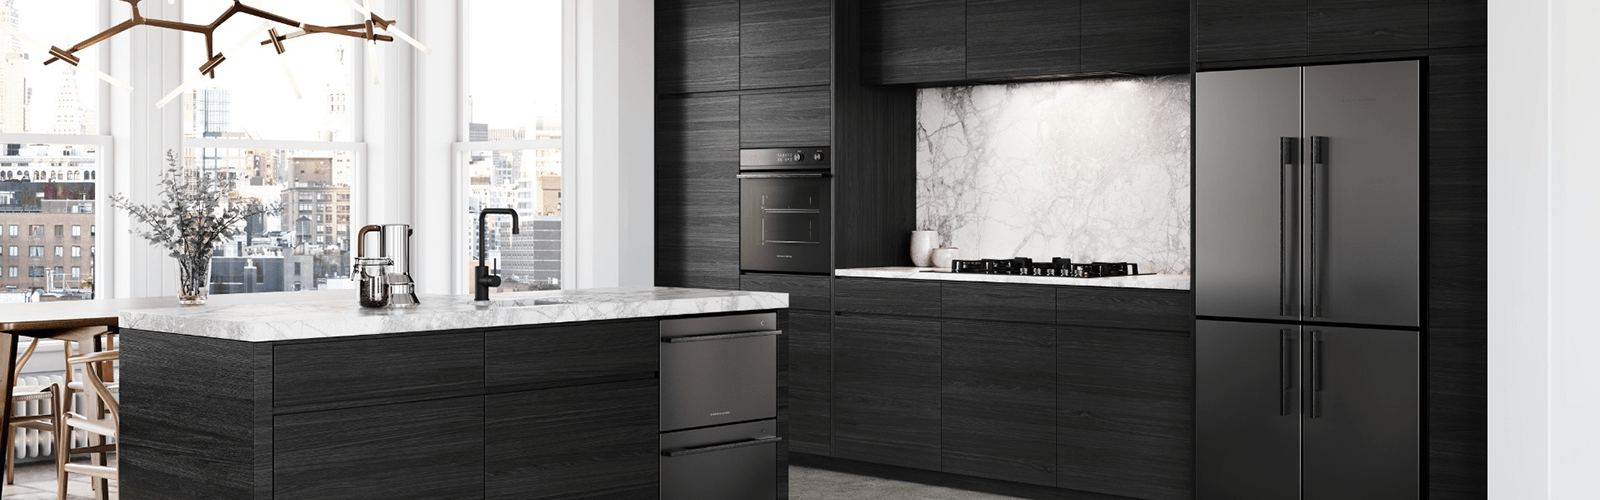 Kitchen with black wooden cabinets, all black Fisher & Paykel appliances, a white marble splashback, and a large window showing a city.